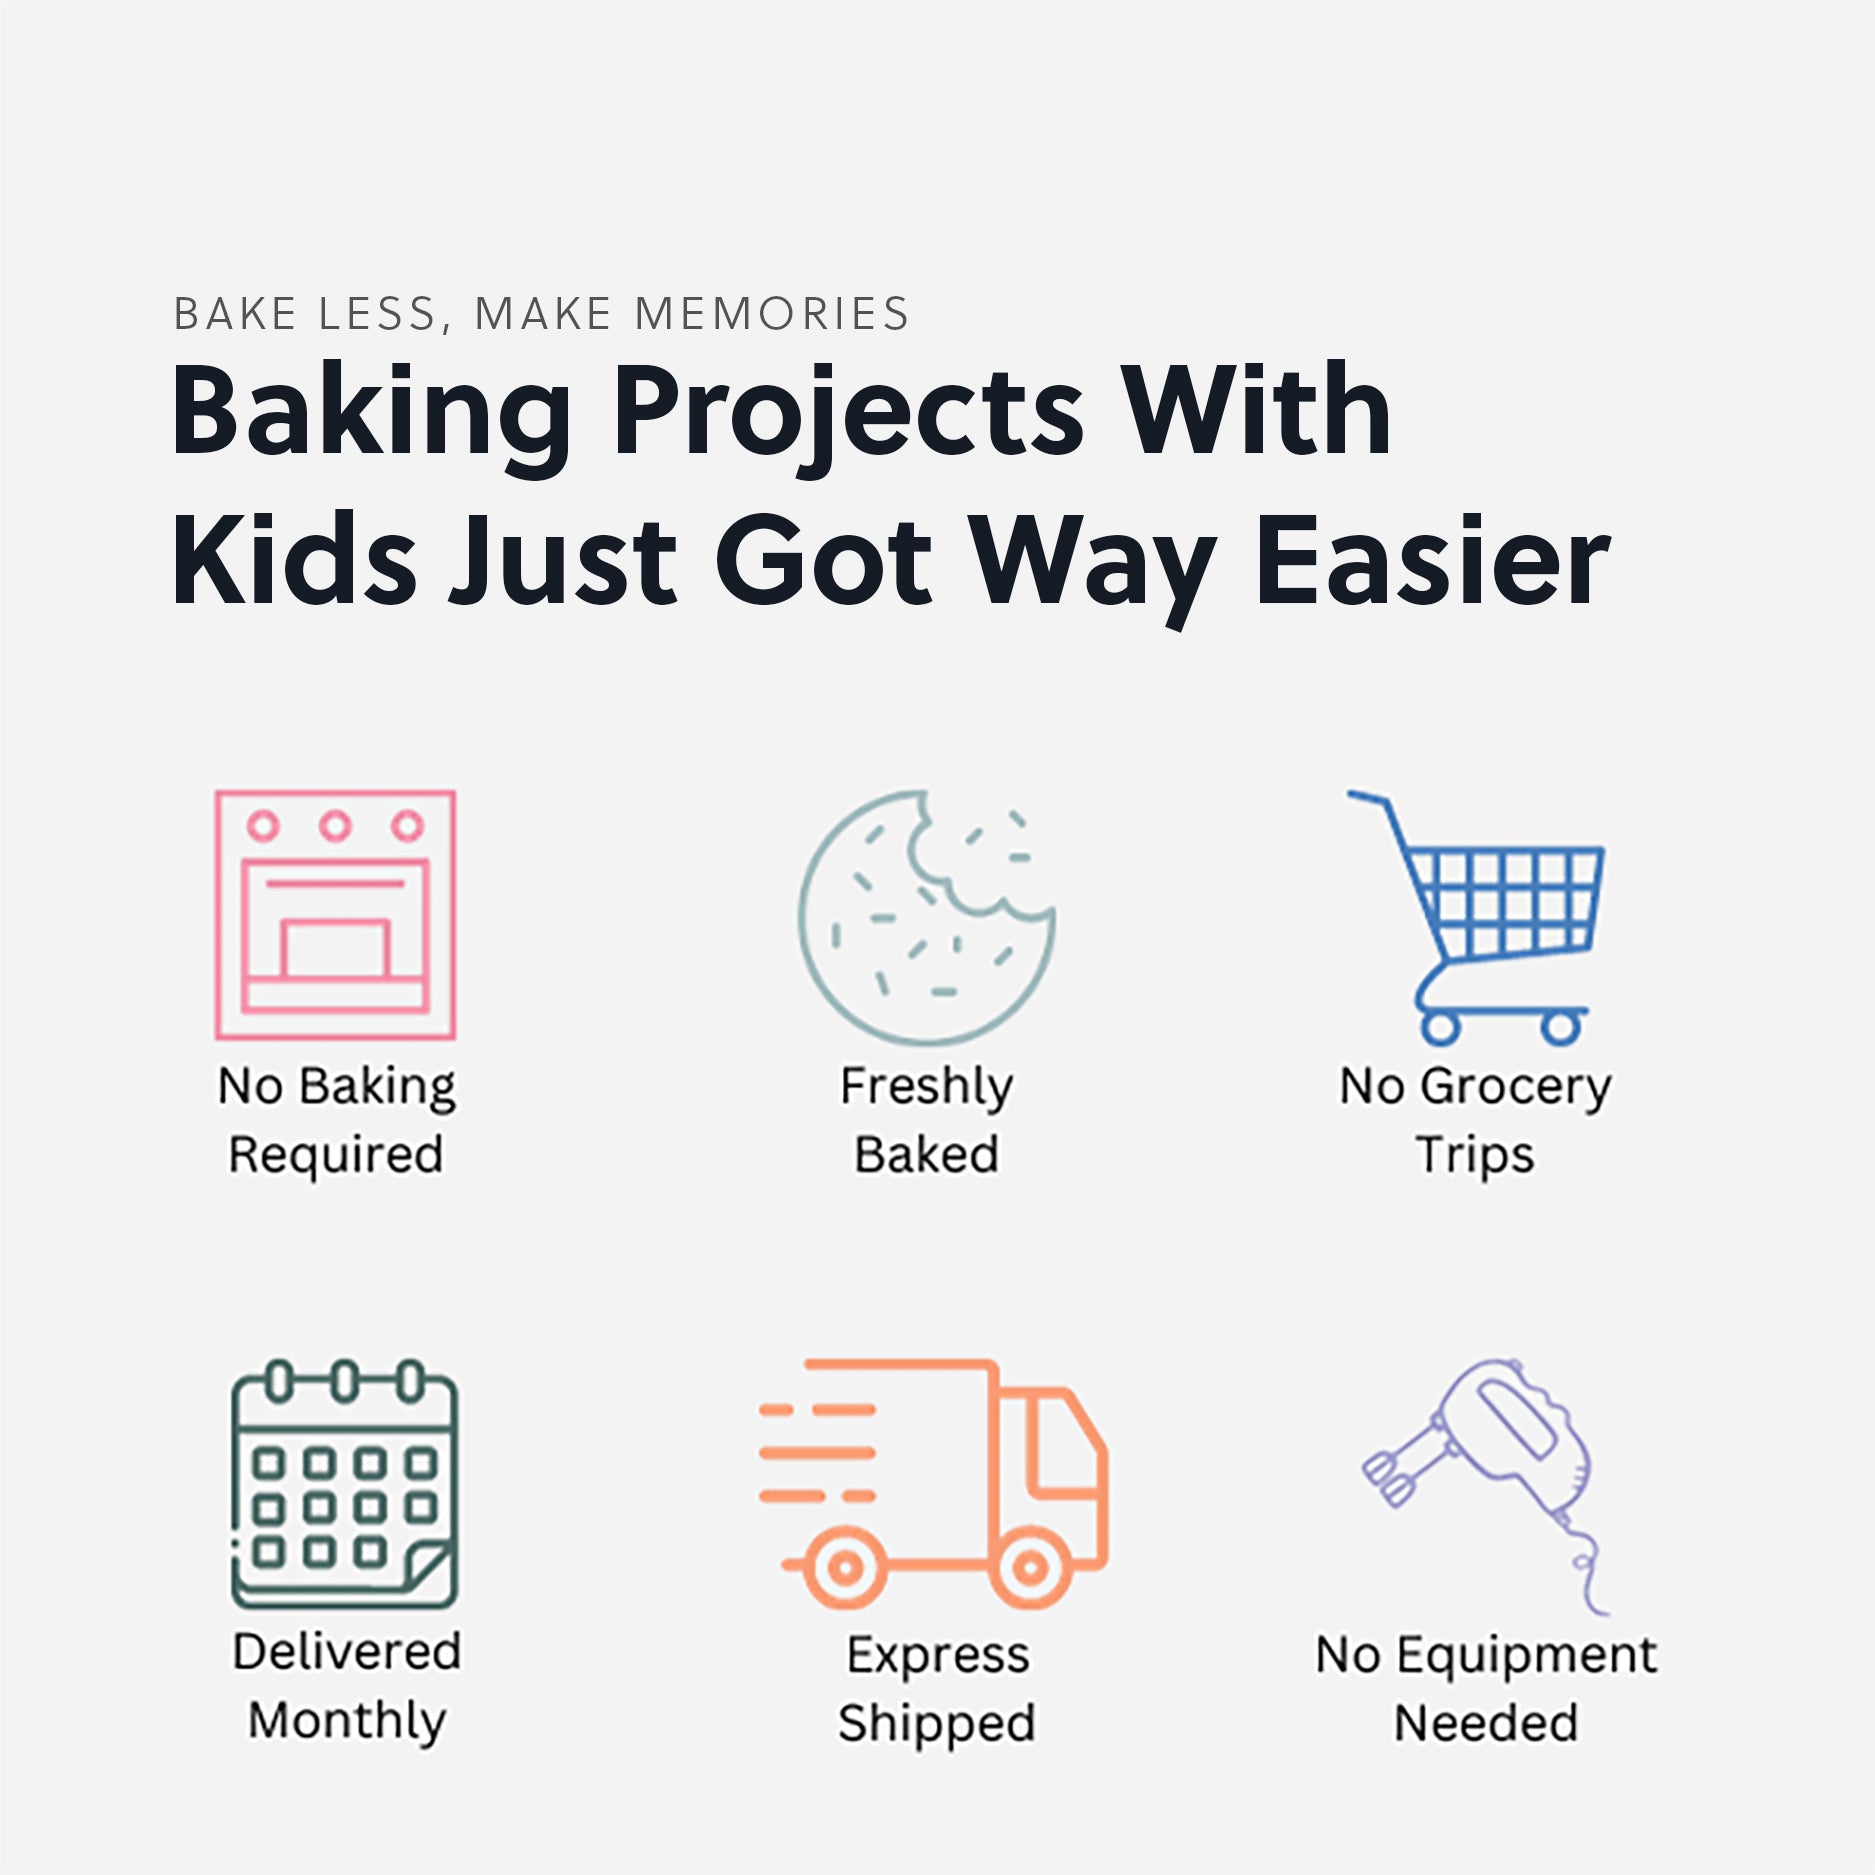 Baking projects with kids just got way easier. Our kits are freshly baked, no baking requires, no grocery trips required, no extra ingredients required, delivered monthly, express shipped, and no baking equipment needed.